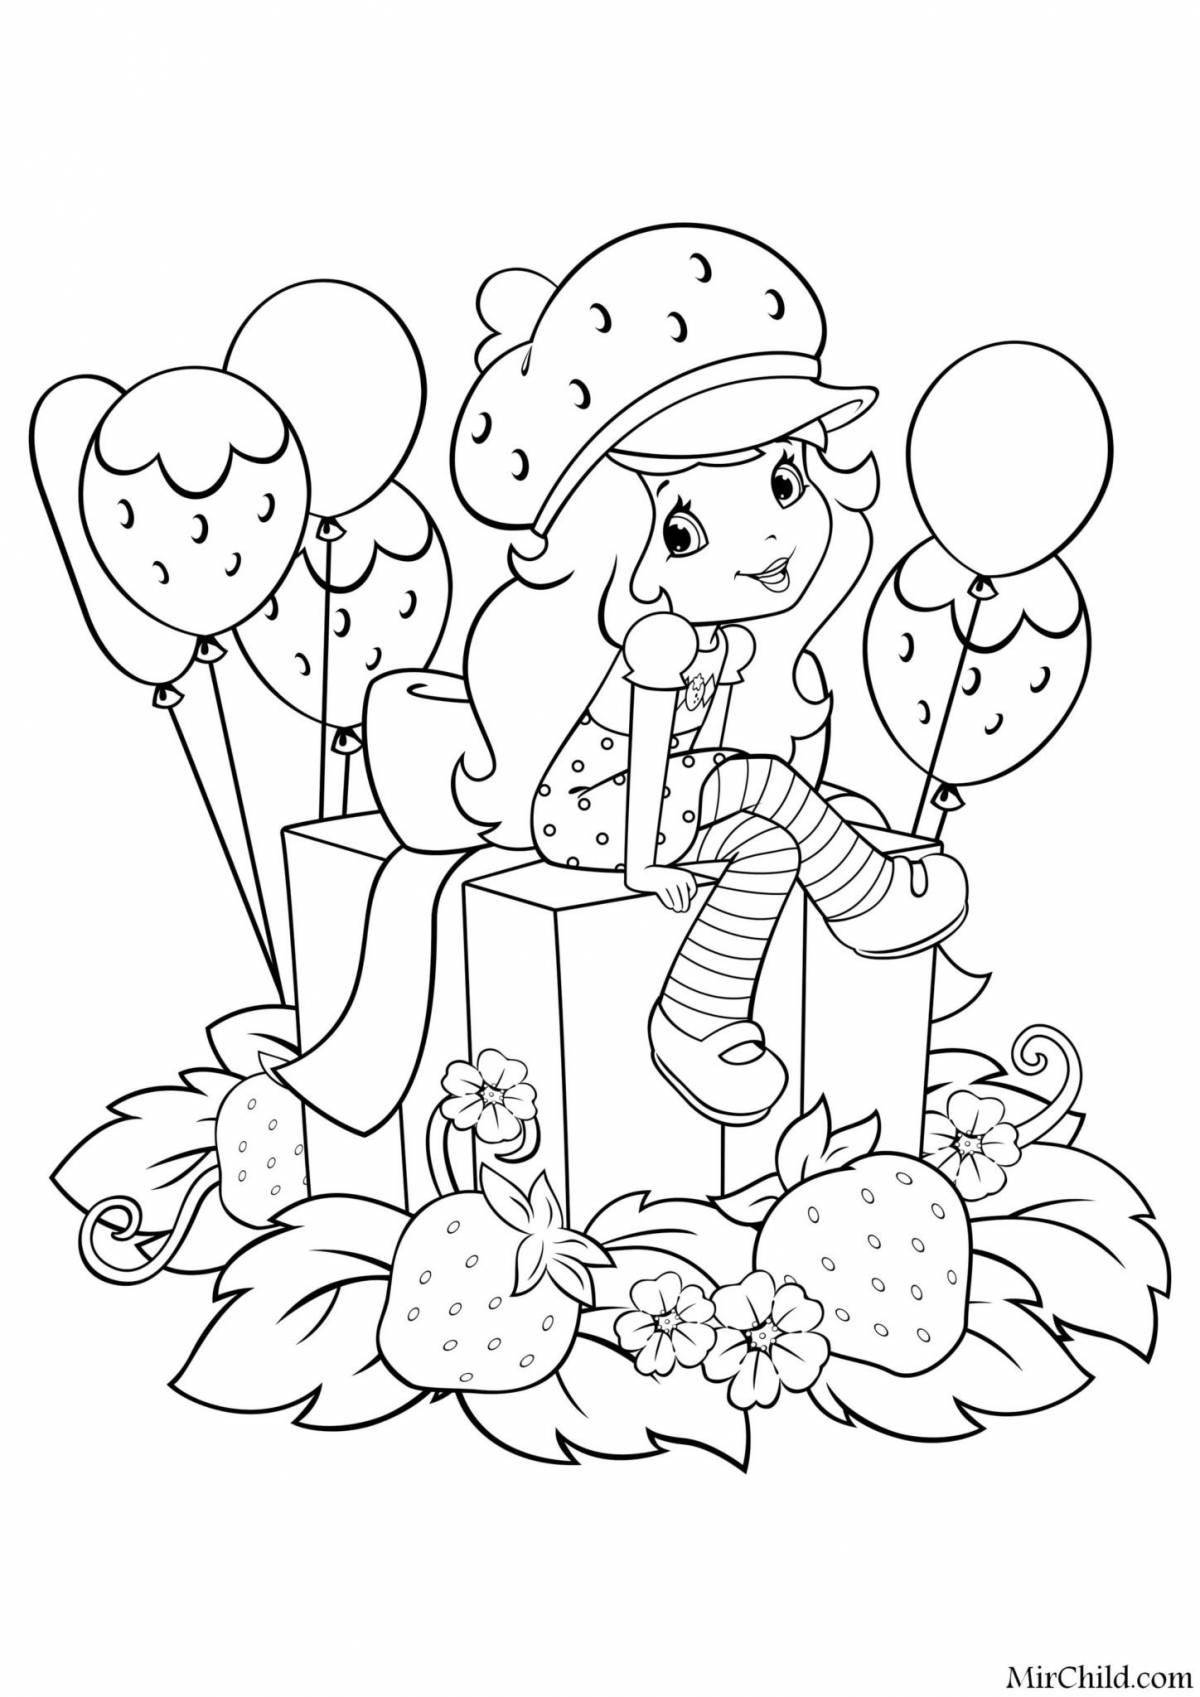 Exquisite birthday sister coloring page